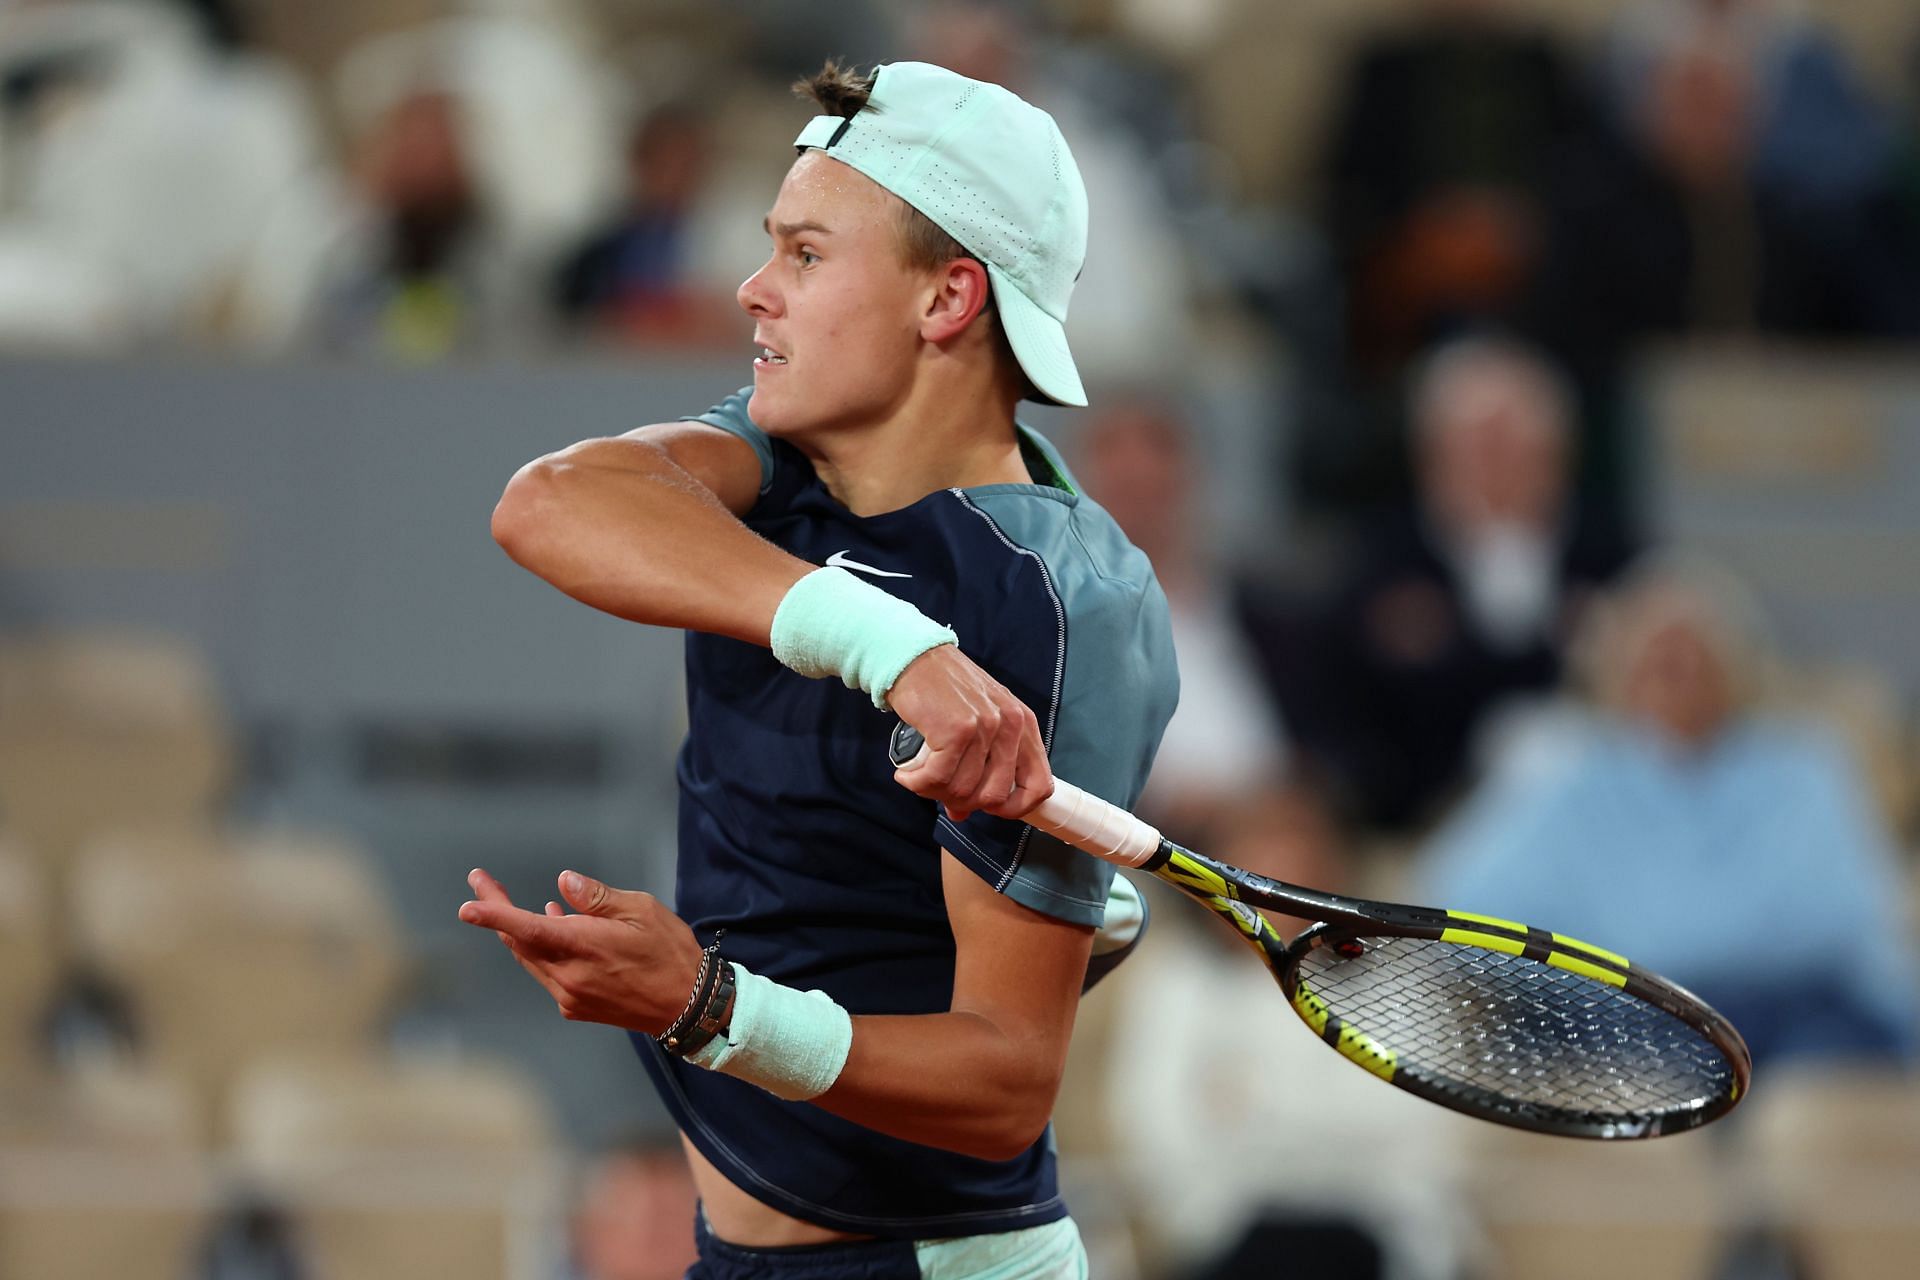 Rune during his quarterfinal encounter at the 2022 French Open.